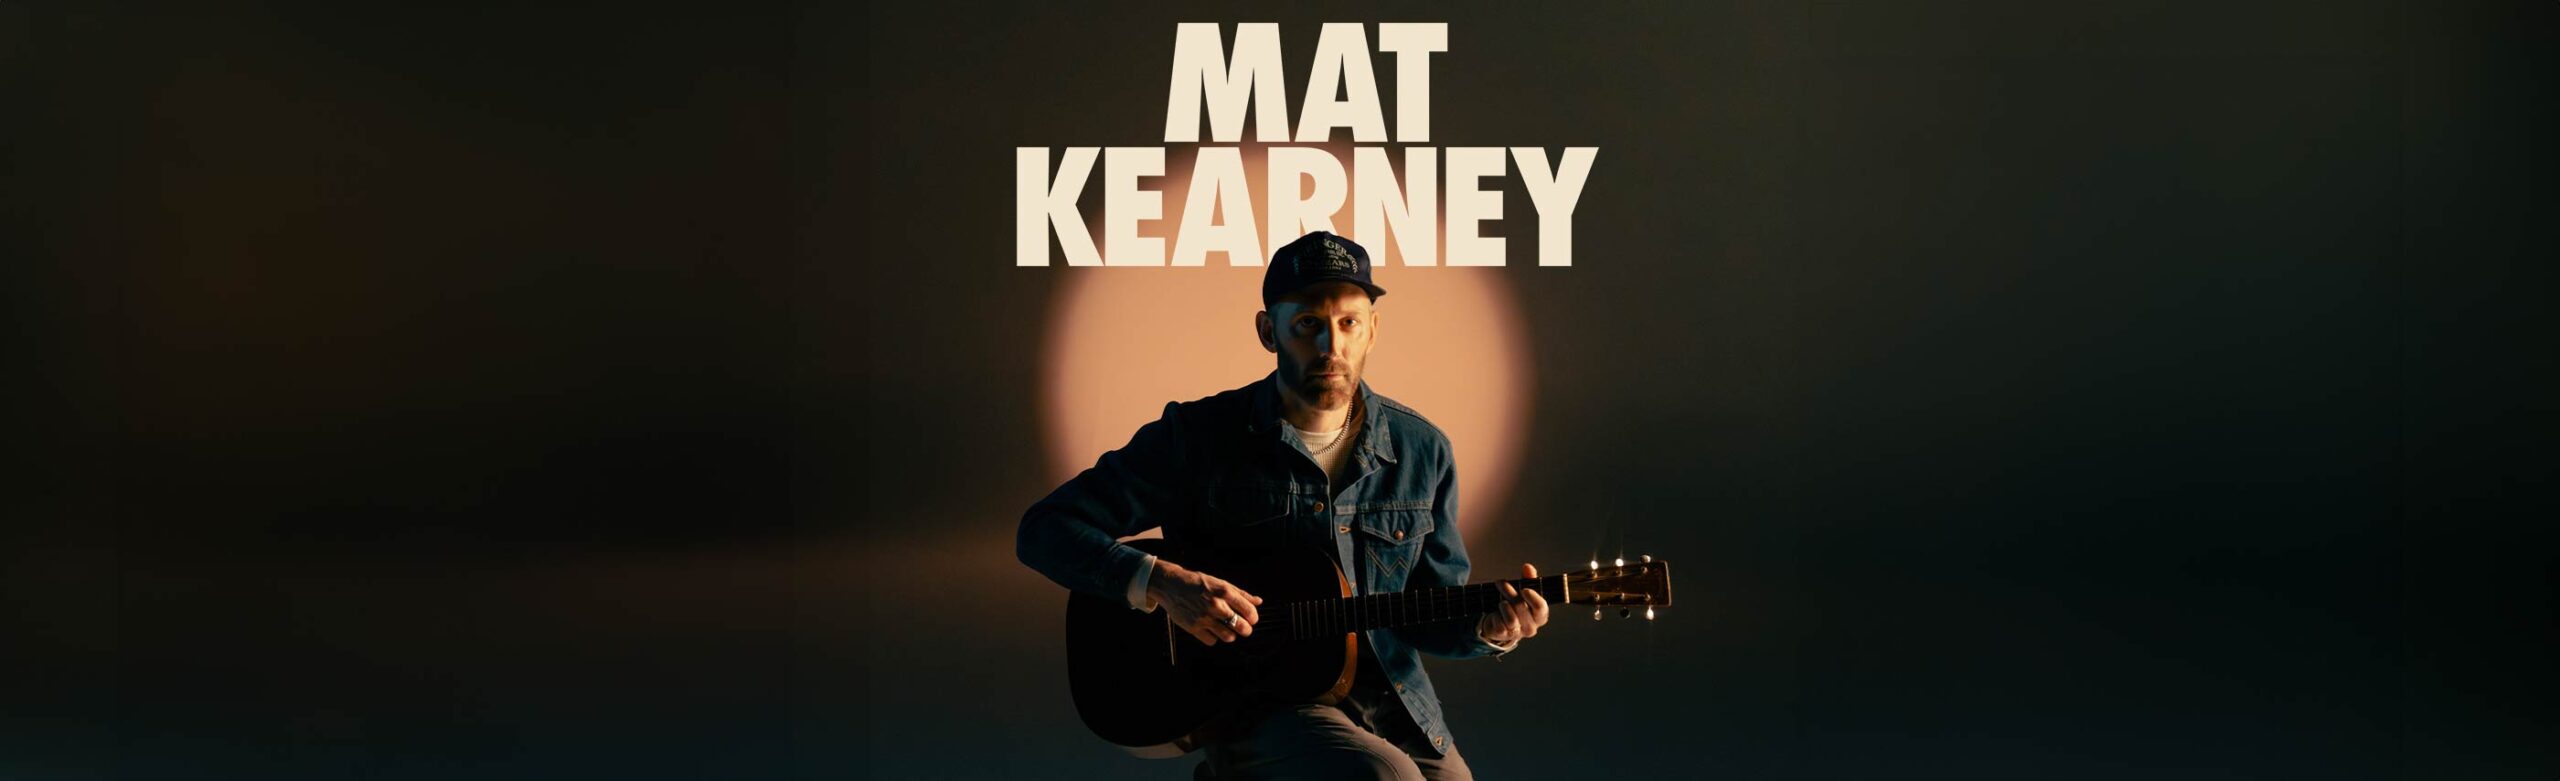 Mat Kearney Announces Headlights Home Tour Stops in Missoula and Bozeman Image